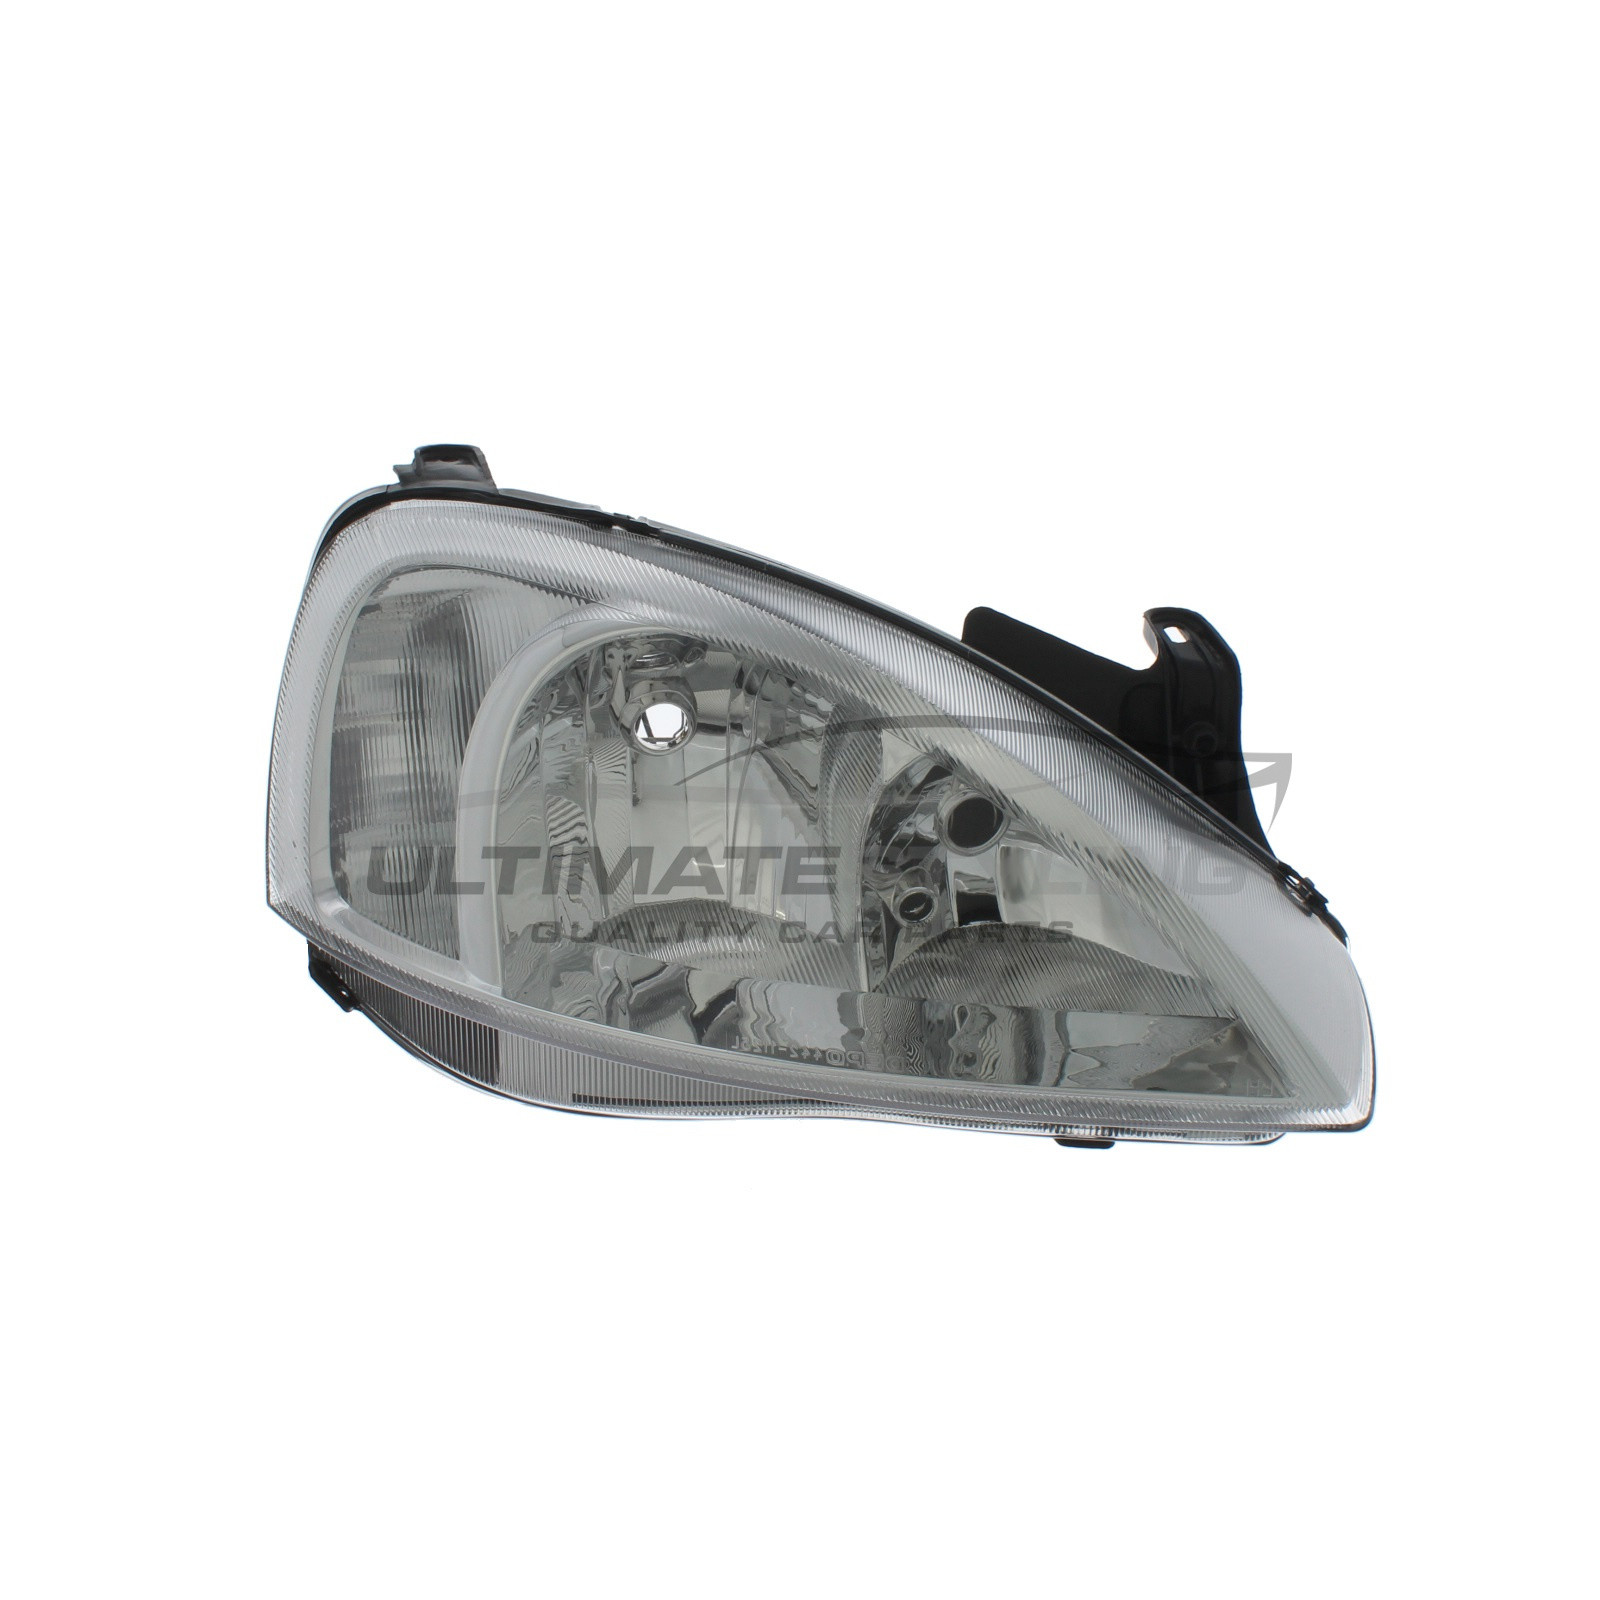 Vauxhall Combo 2001-2002, Corsa 2000-2003 Halogen, Electric Without Motor, Chrome Headlight / Headlamp Including Clear Indicator (Non-Projector Type) Drivers Side (RH)